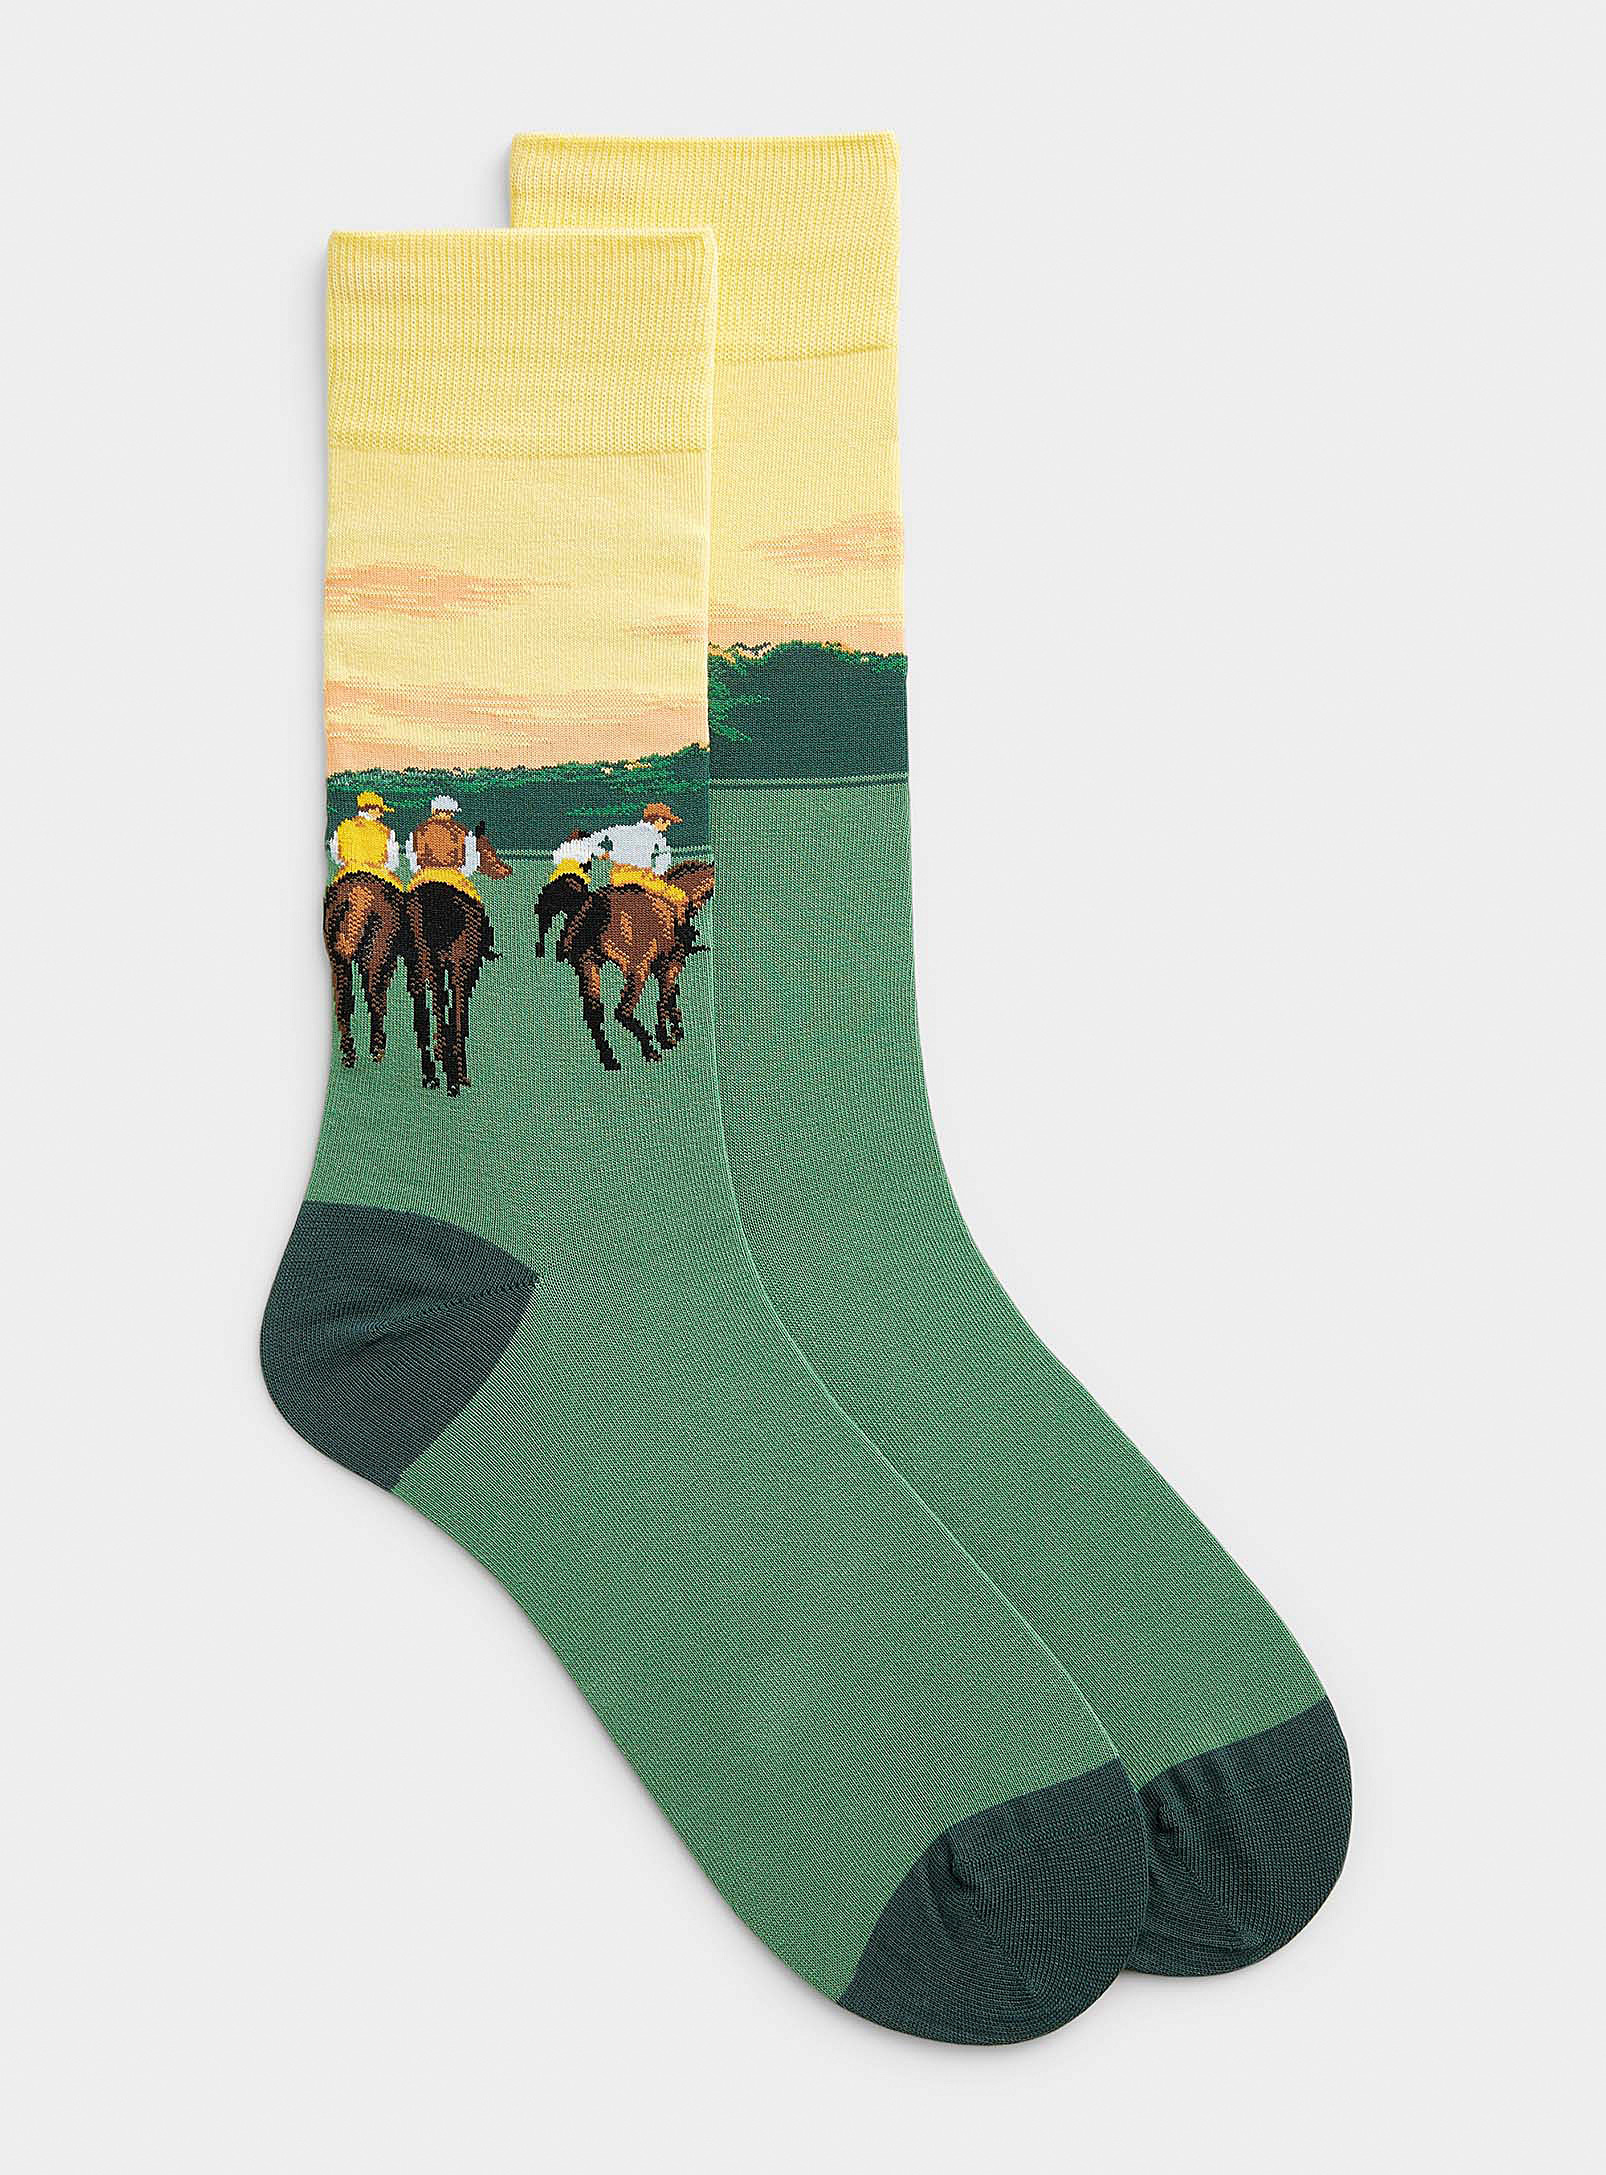 New Balance Longchamp Racehorse Sock In Patterned Green